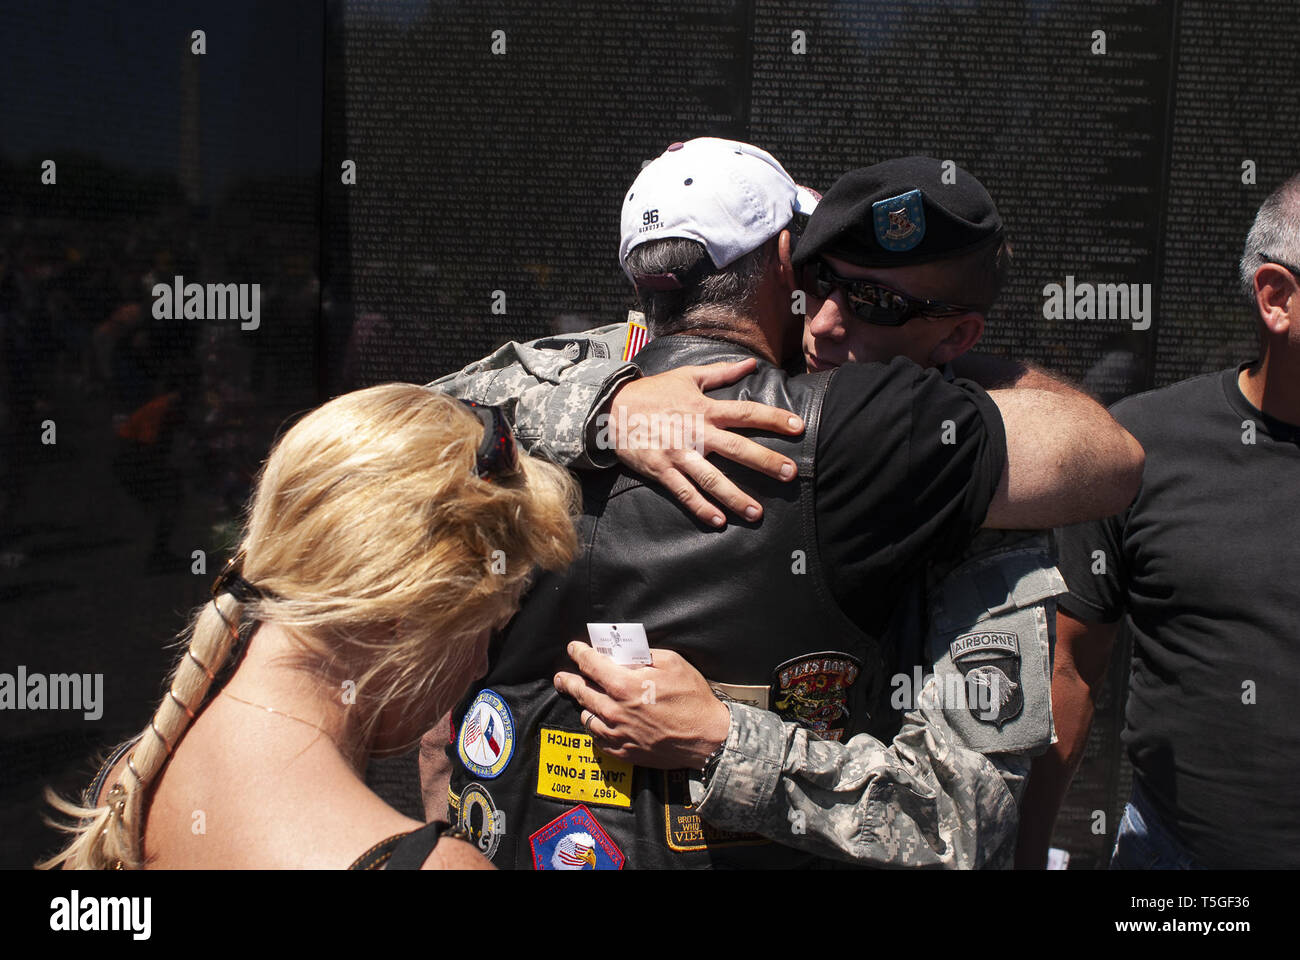 Washington, DC, USA. 25th May, 2008. Steve Verrigni, a Vietnam veteran, and Sgt. Matthew Brugeman, a two-tour Iraq veteran with the 101st Airborne Division, hug after Verrigni gave him an engraved dogtag at the Vietnam War Memorial during Rolling Thunder May 25, 2008. Brugeman was wounded in Iraq and is currently a patient at Walter Reed.Rolling Thunder is an annual motorcycle rally attended by thousands of veterans to commemorate Memorial Day. Credit: Bill Putnam/ZUMA Wire/Alamy Live News Stock Photo